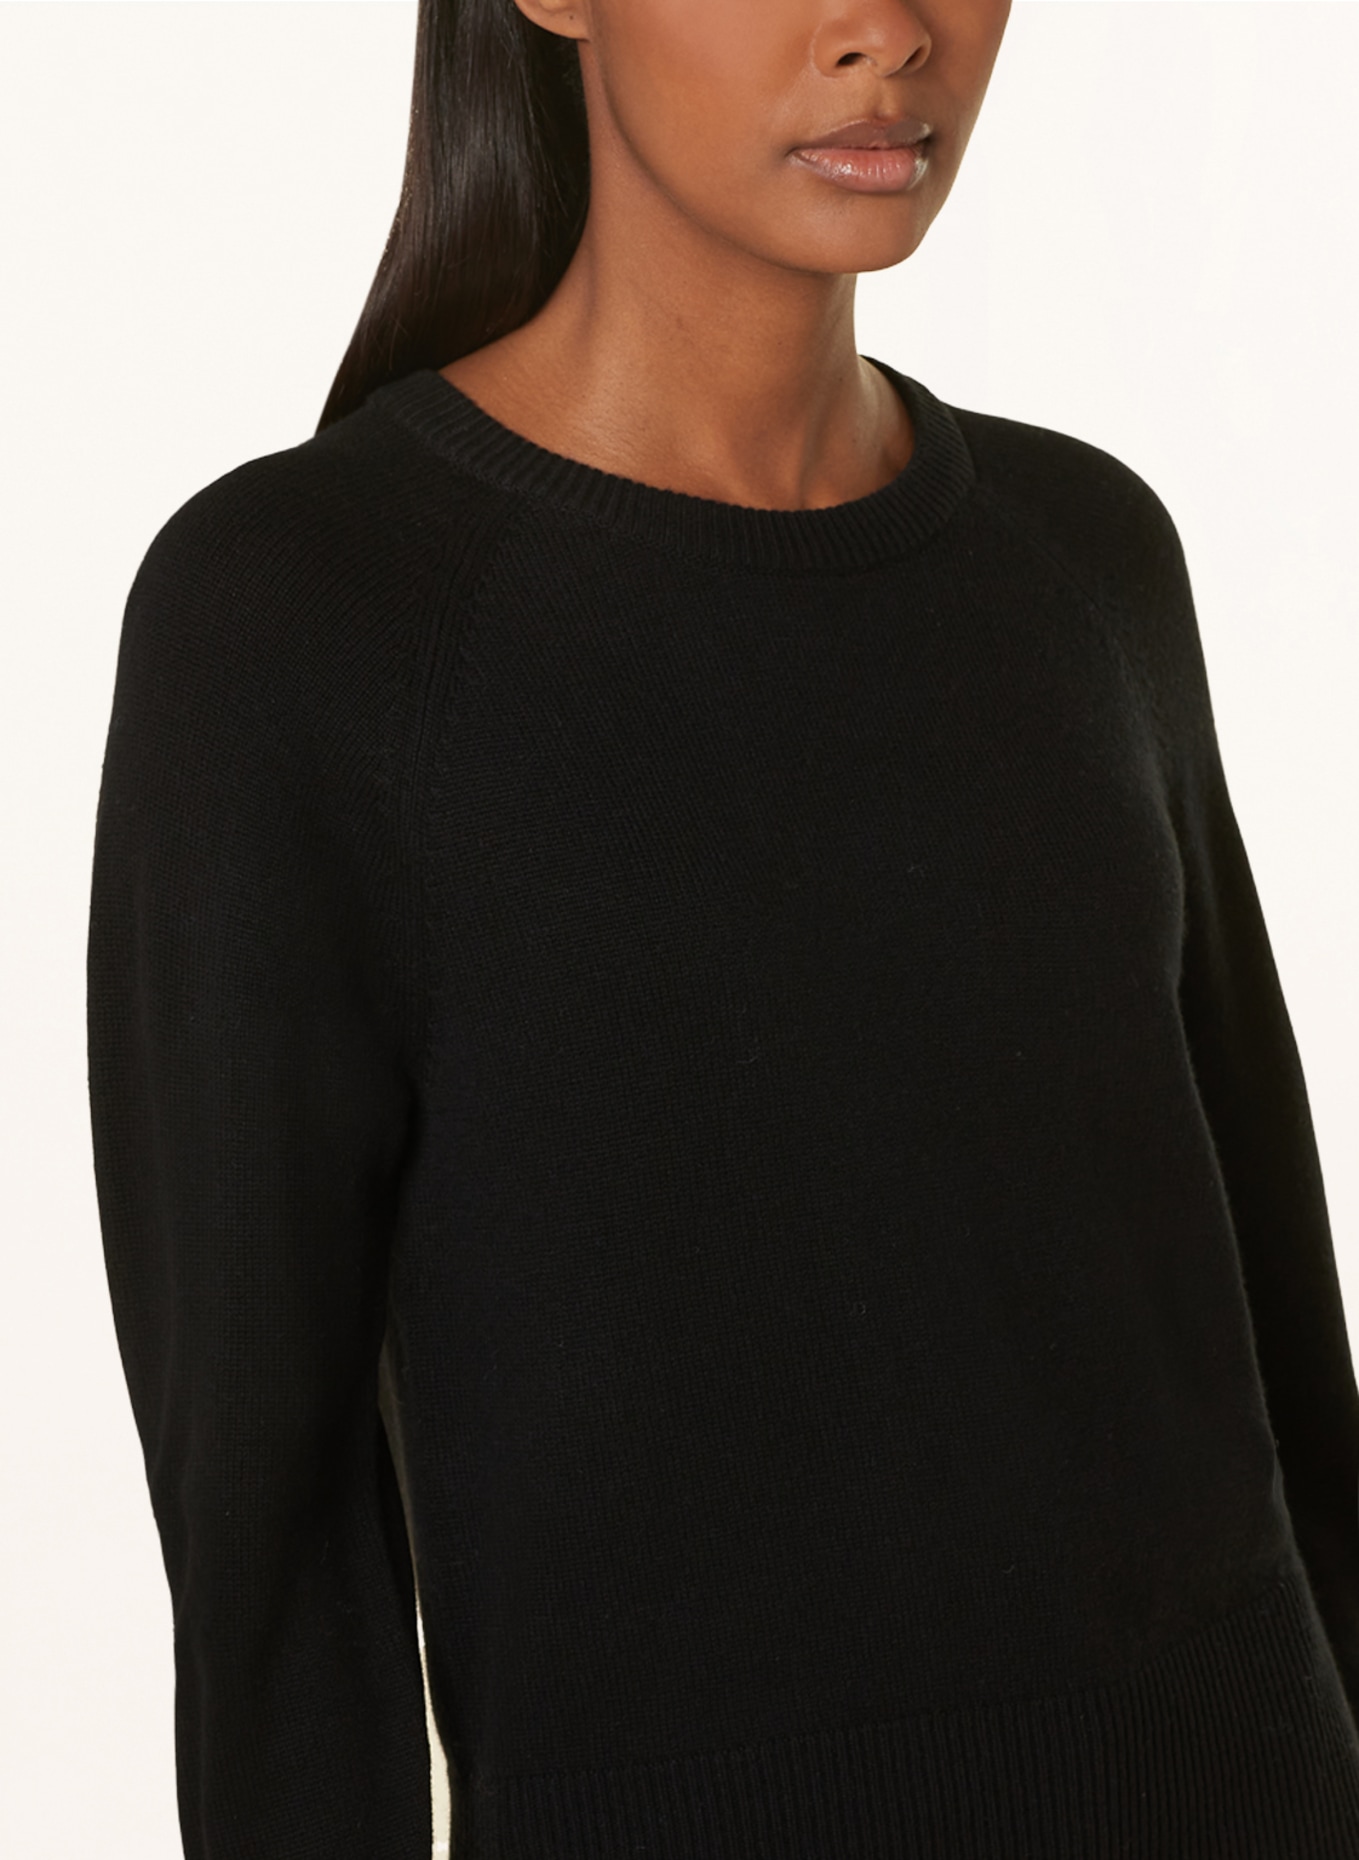 REPEAT Sweater, Color: BLACK (Image 4)